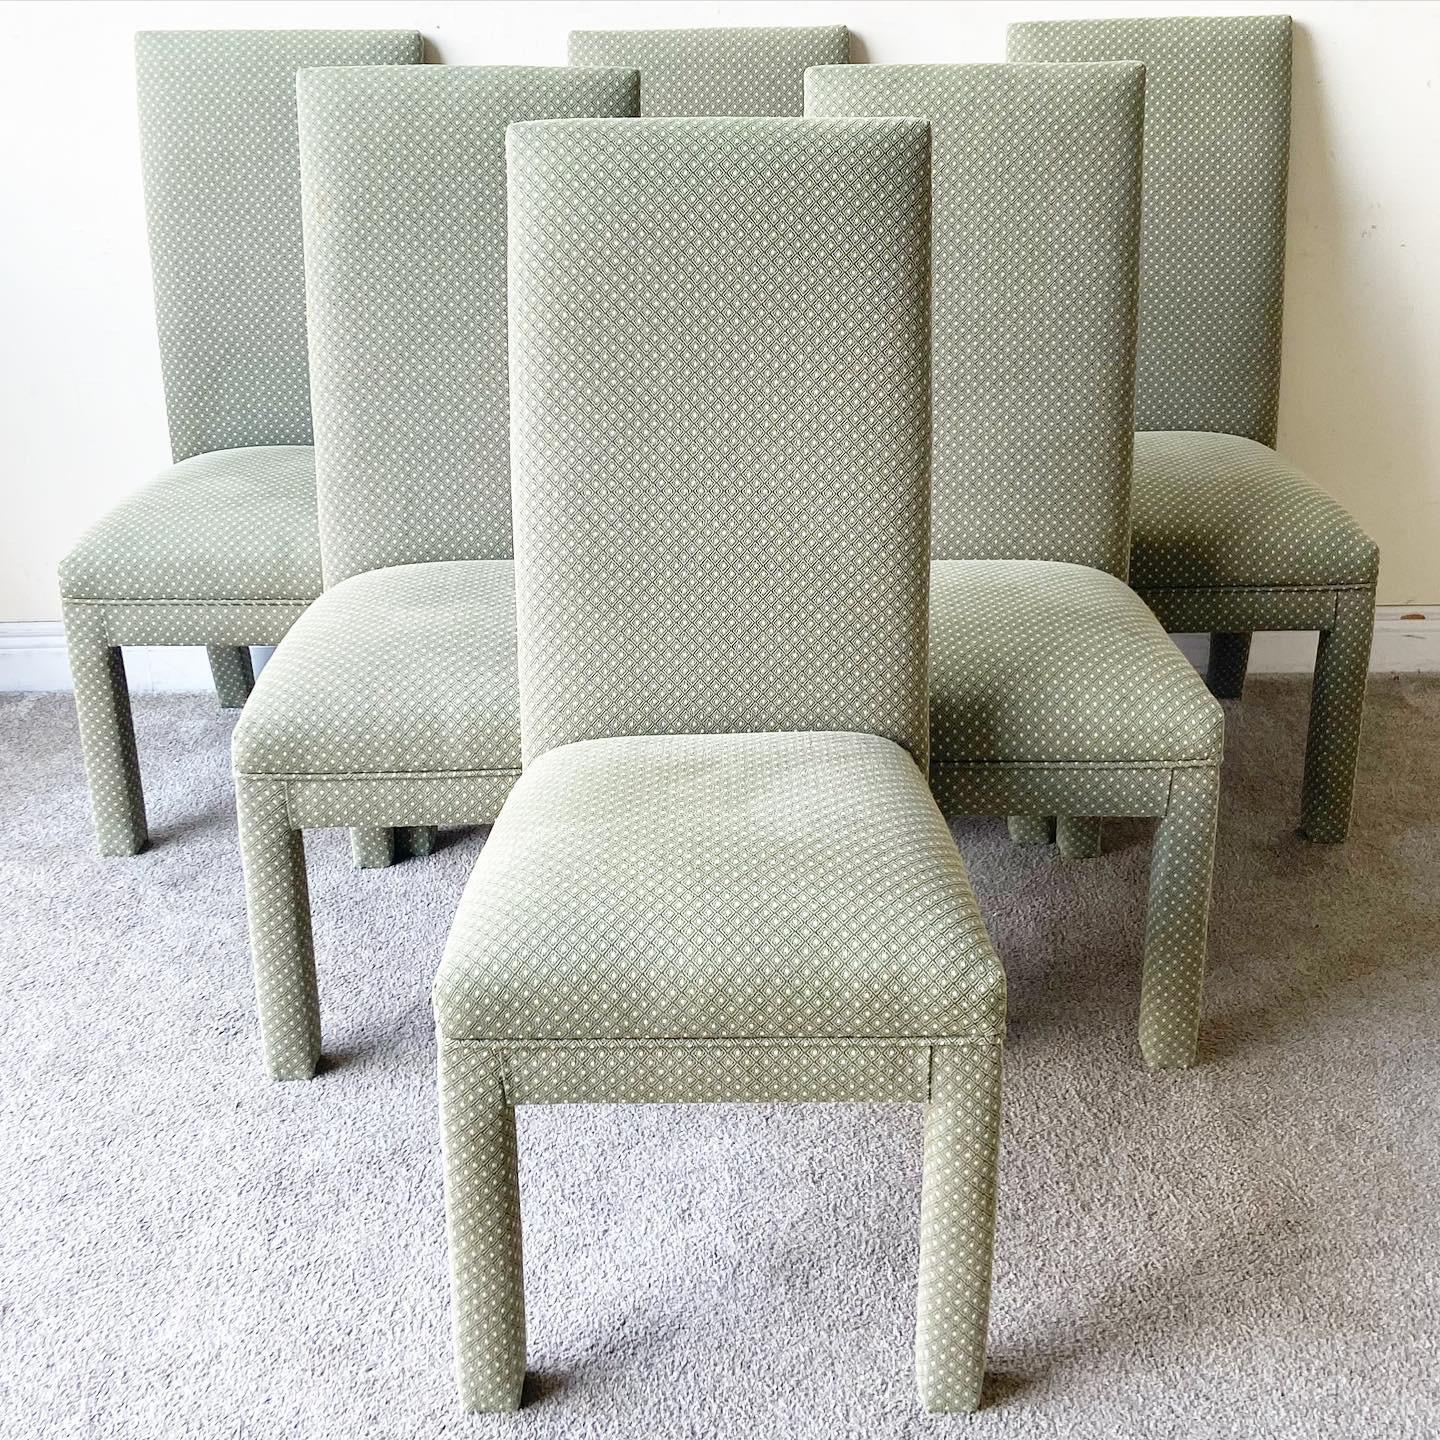 Exceptional set of postmodern parsons chairs. Features a green fabric with beige informally distributed through the fabric.
 